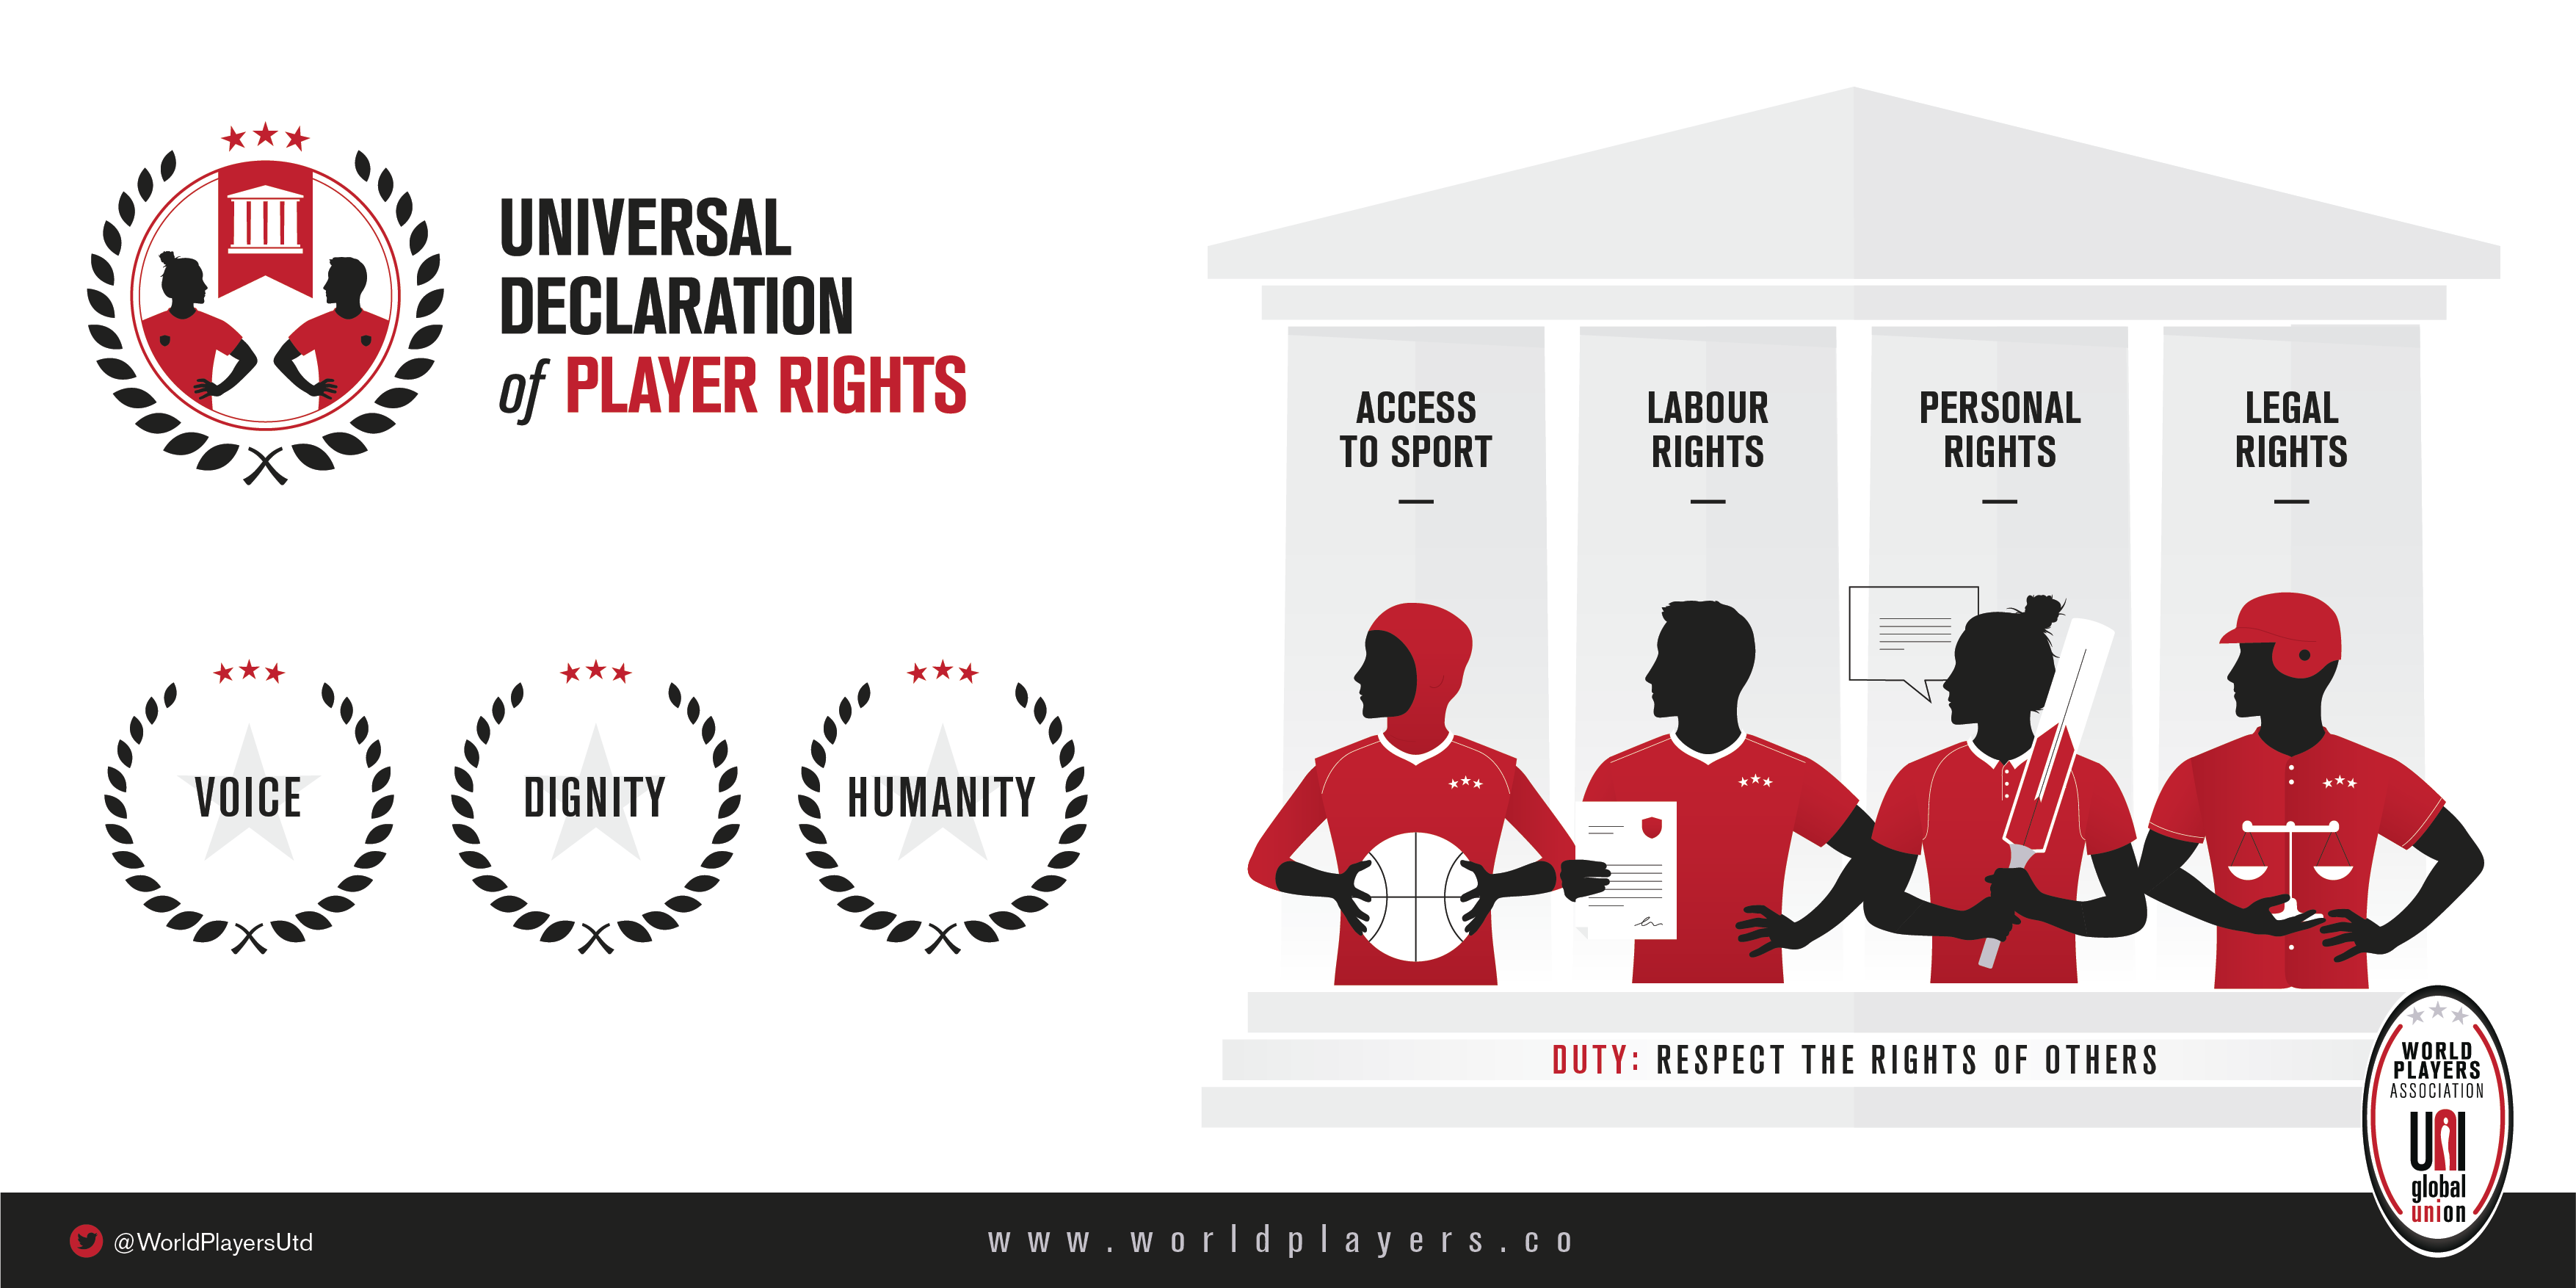 World Players Association launches universal declaration of player rights